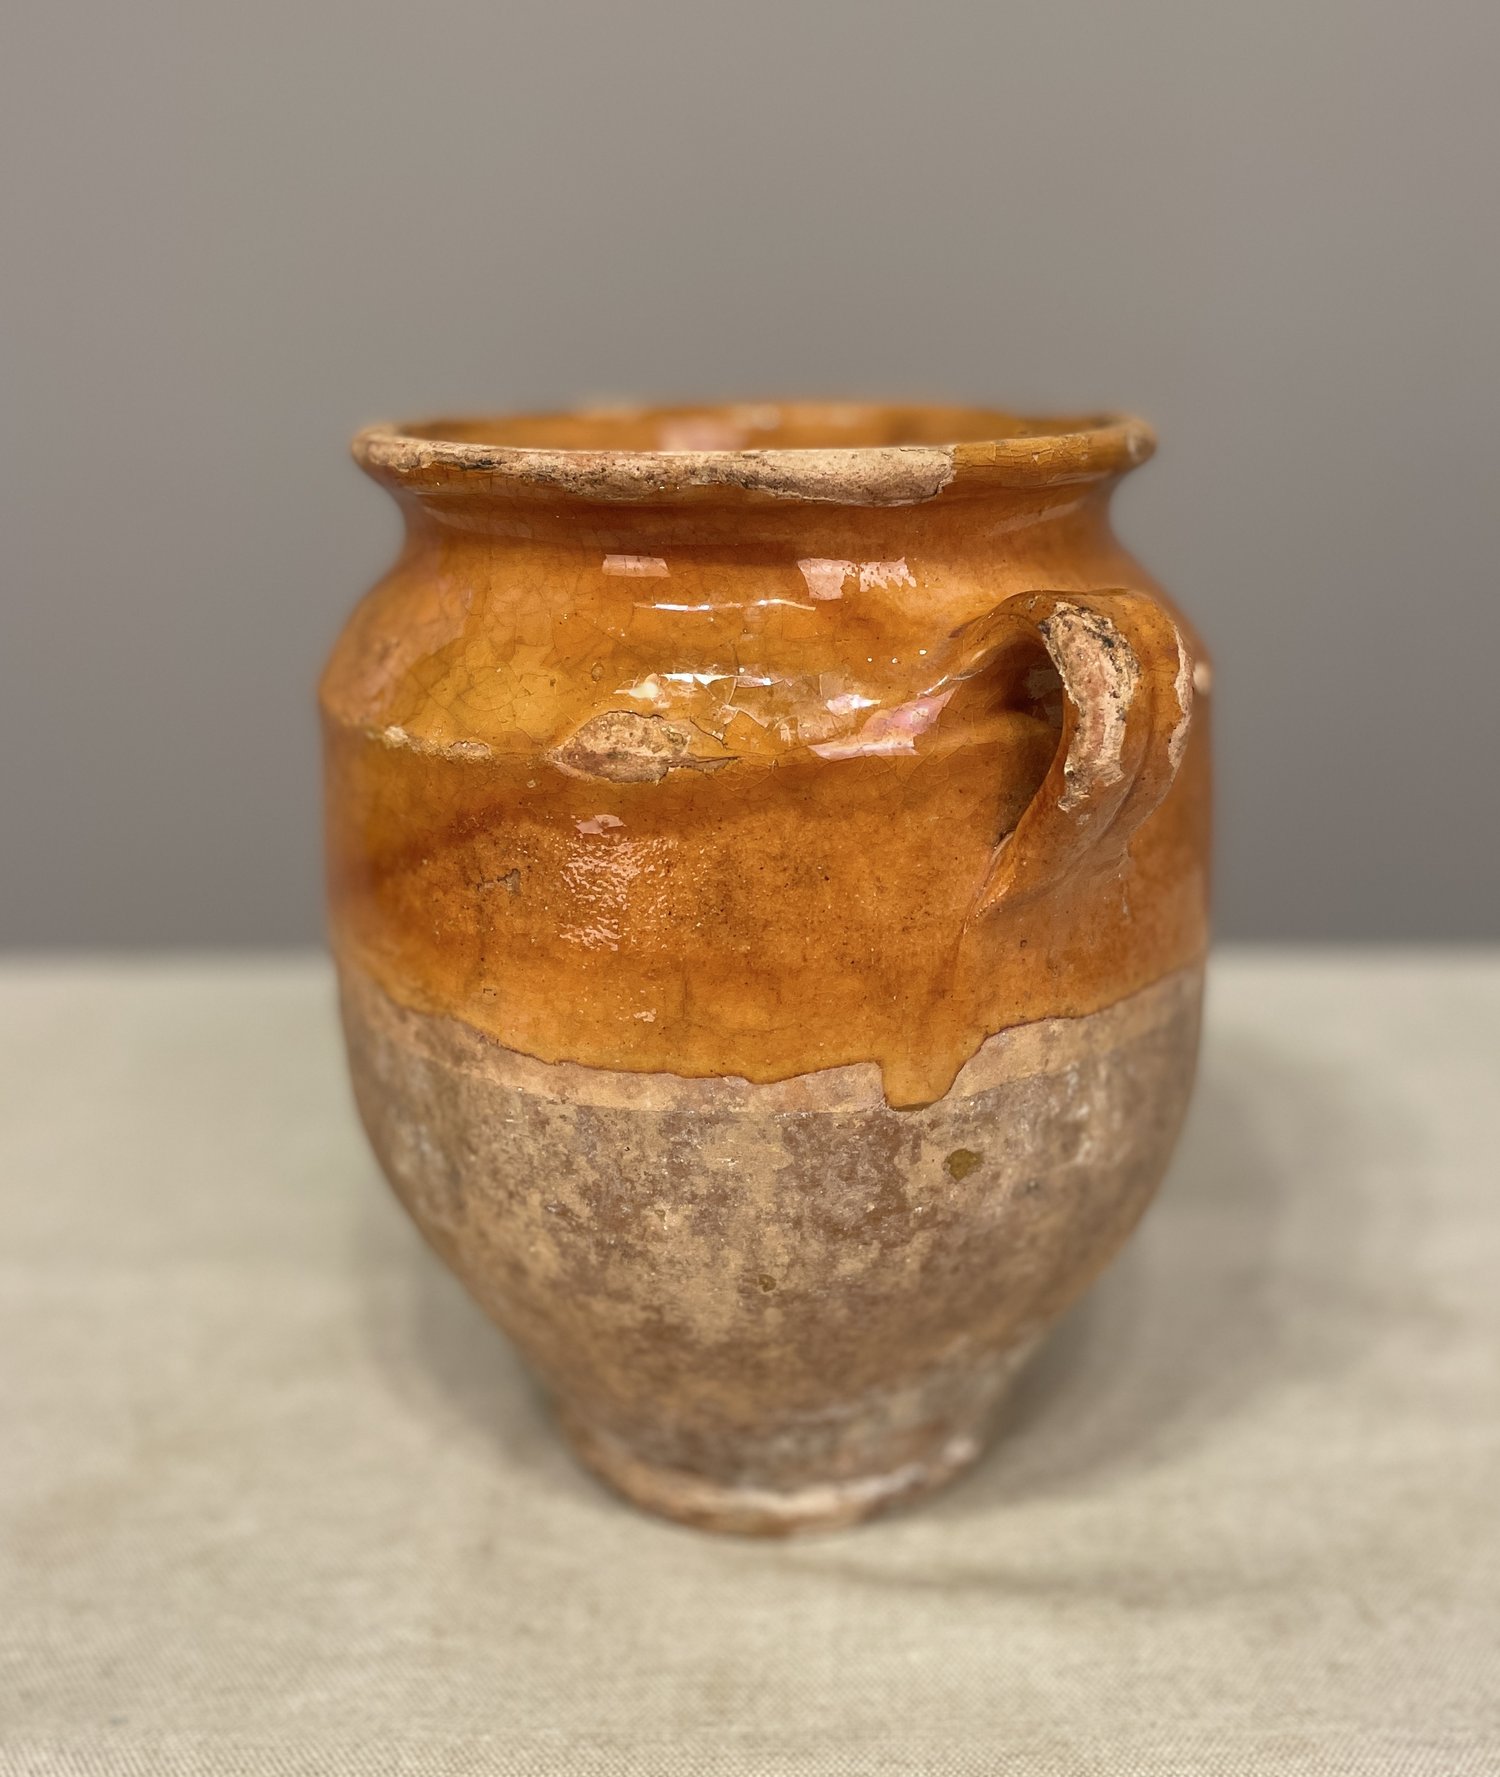 Textured pot, messed it up glaze 😔 : r/Pottery